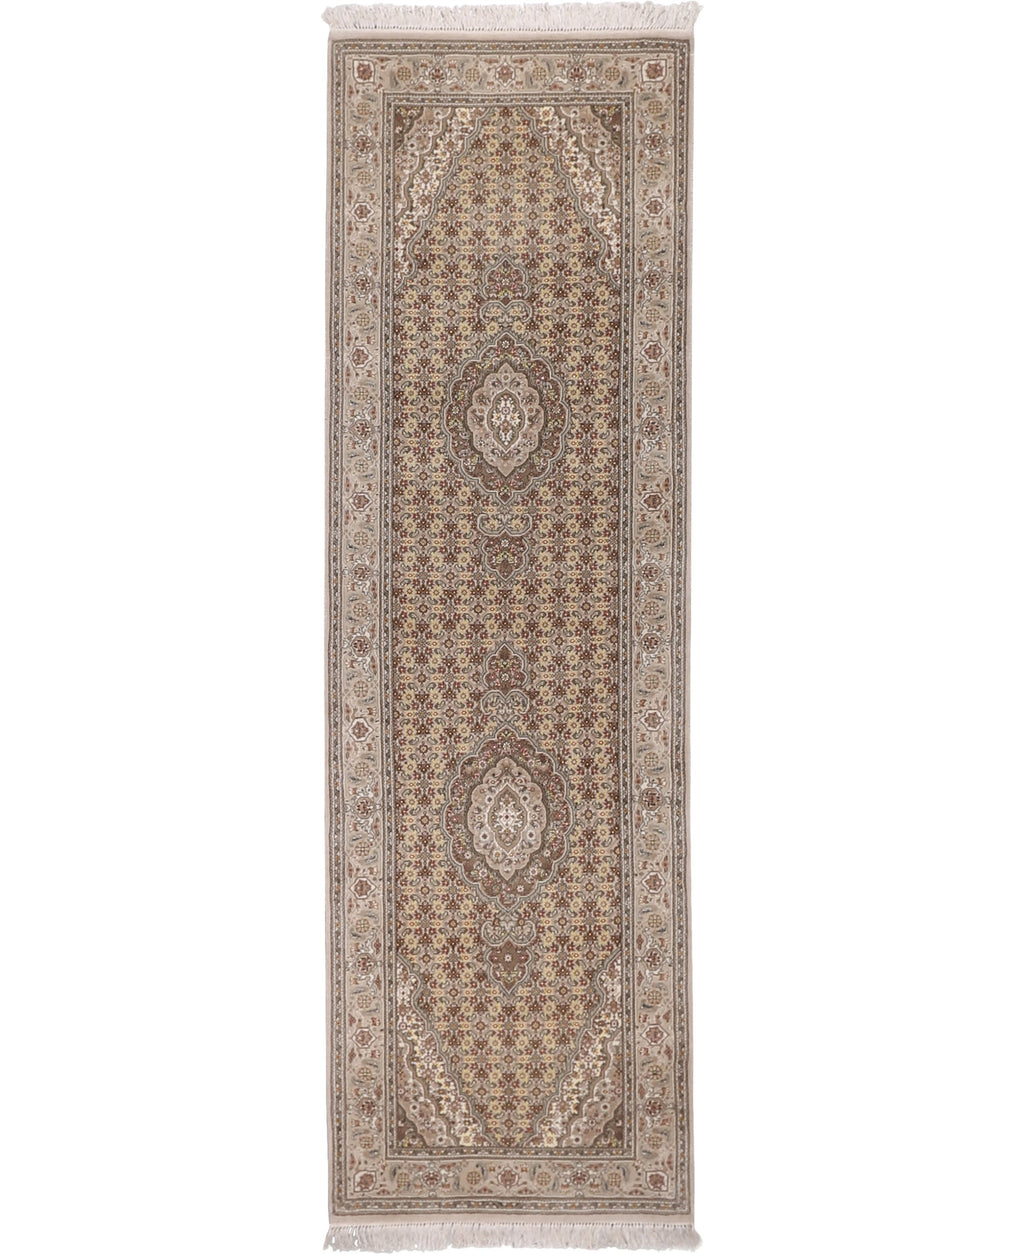 Siperso Wool Rug 2'6''x8'5''